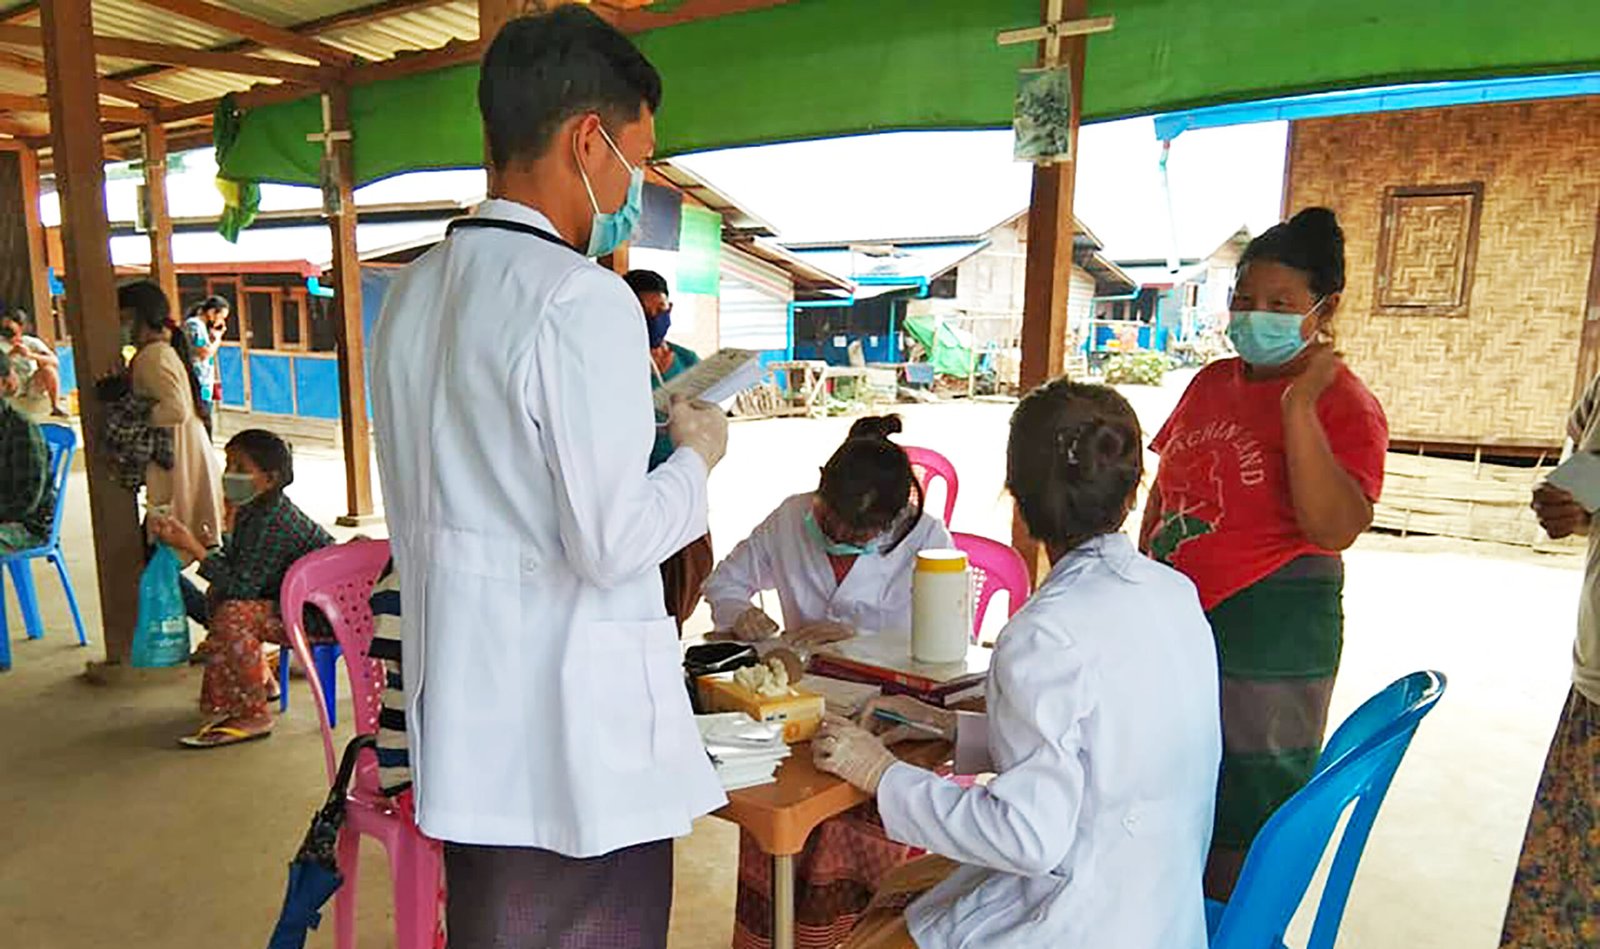 Villagers Uprooted By Fighting in Kachin State Need Medicine